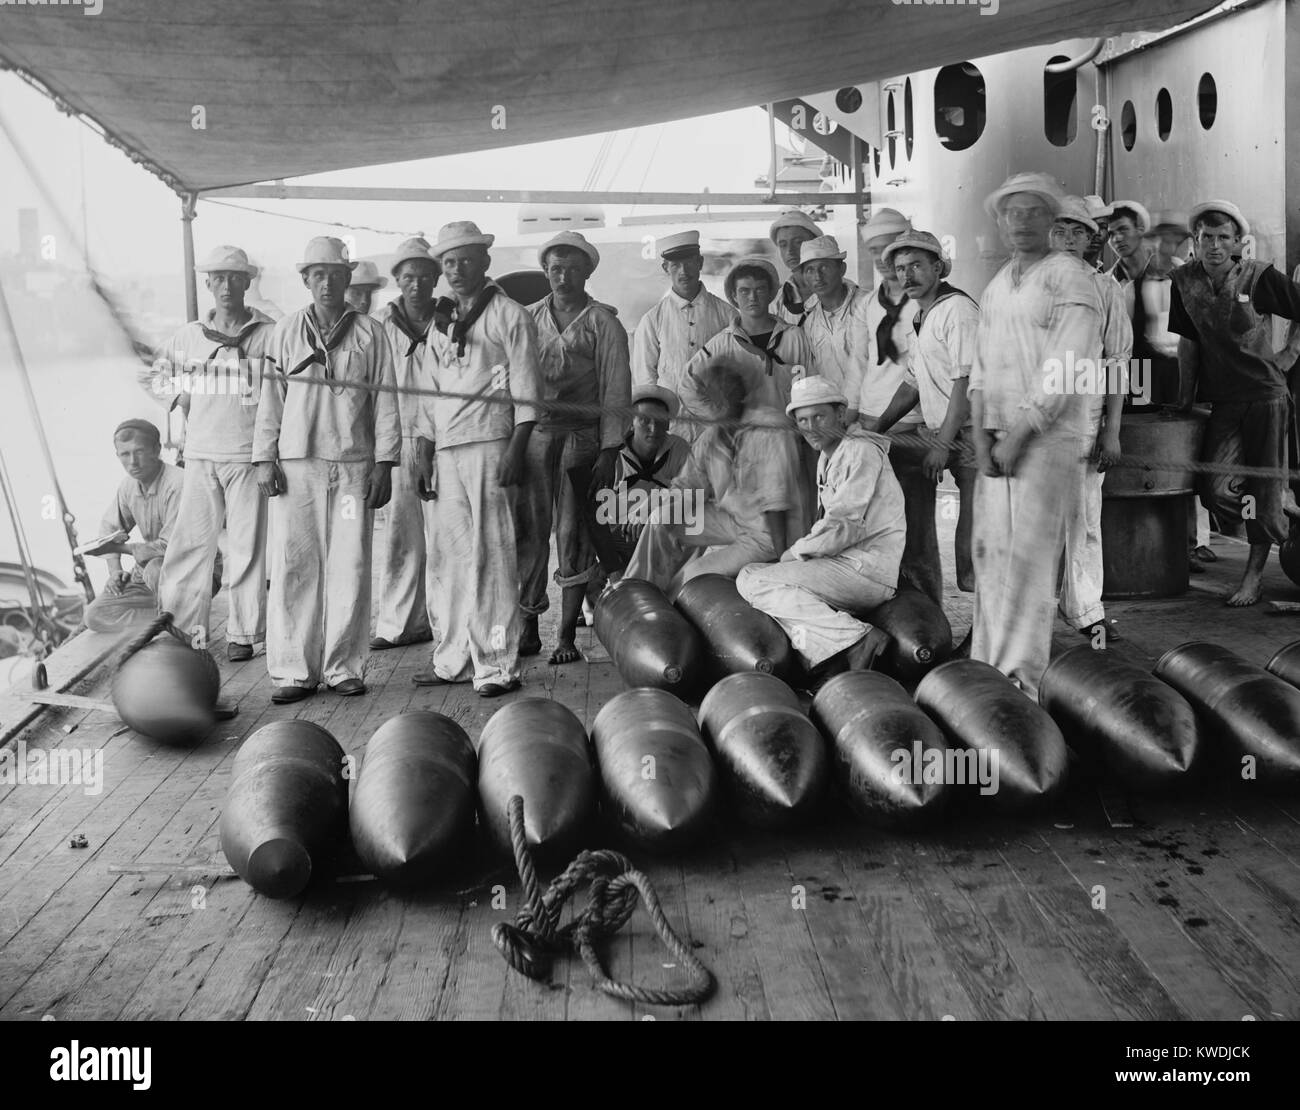 Crew of the USS Texas, posing with ammunition. During the Battle of Santiago on July 3, 1898, the battleships shelled and disabled the Spanish cruisers Vizcaya and Cristobal Colon (BSLOC_2017_10_50) Stock Photo